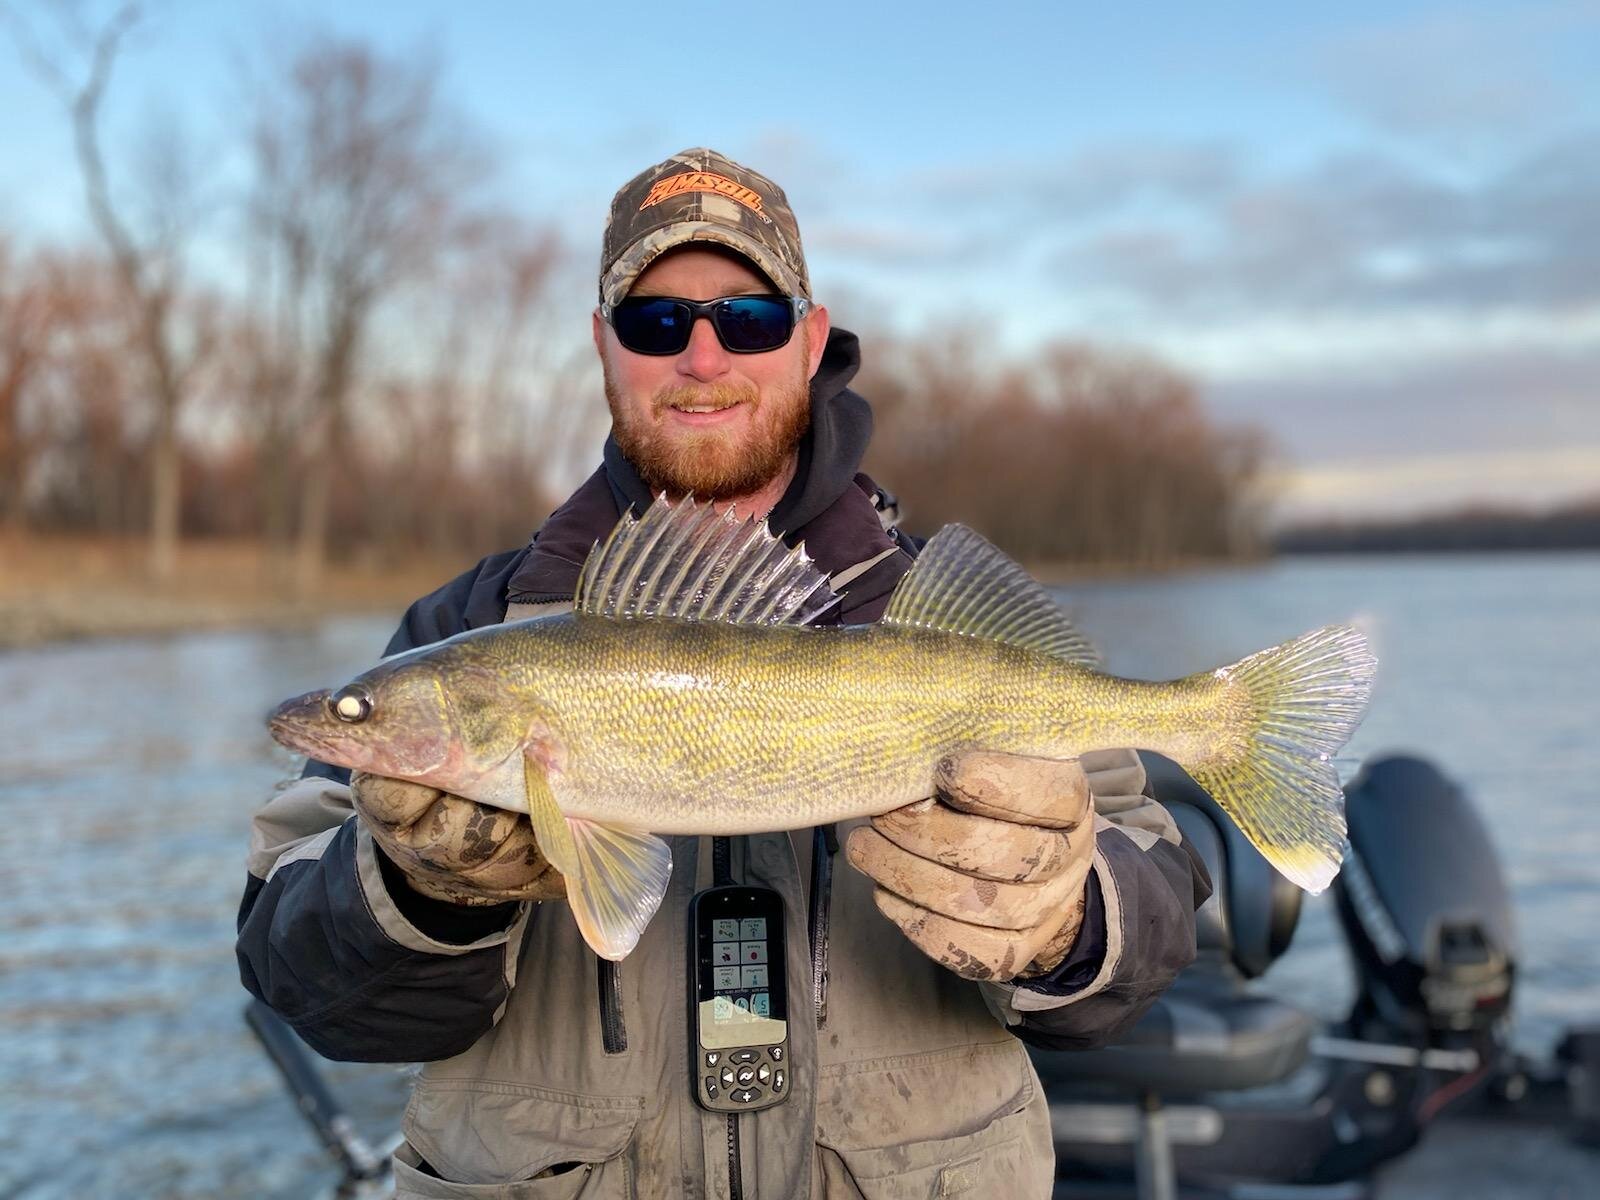 Mississippi River Pool 4 and Lake Pepin Fishing Guide for Walleye, Sauger,  Bluegill, Crappie, Mississippi River fishing report, Ice Fishing